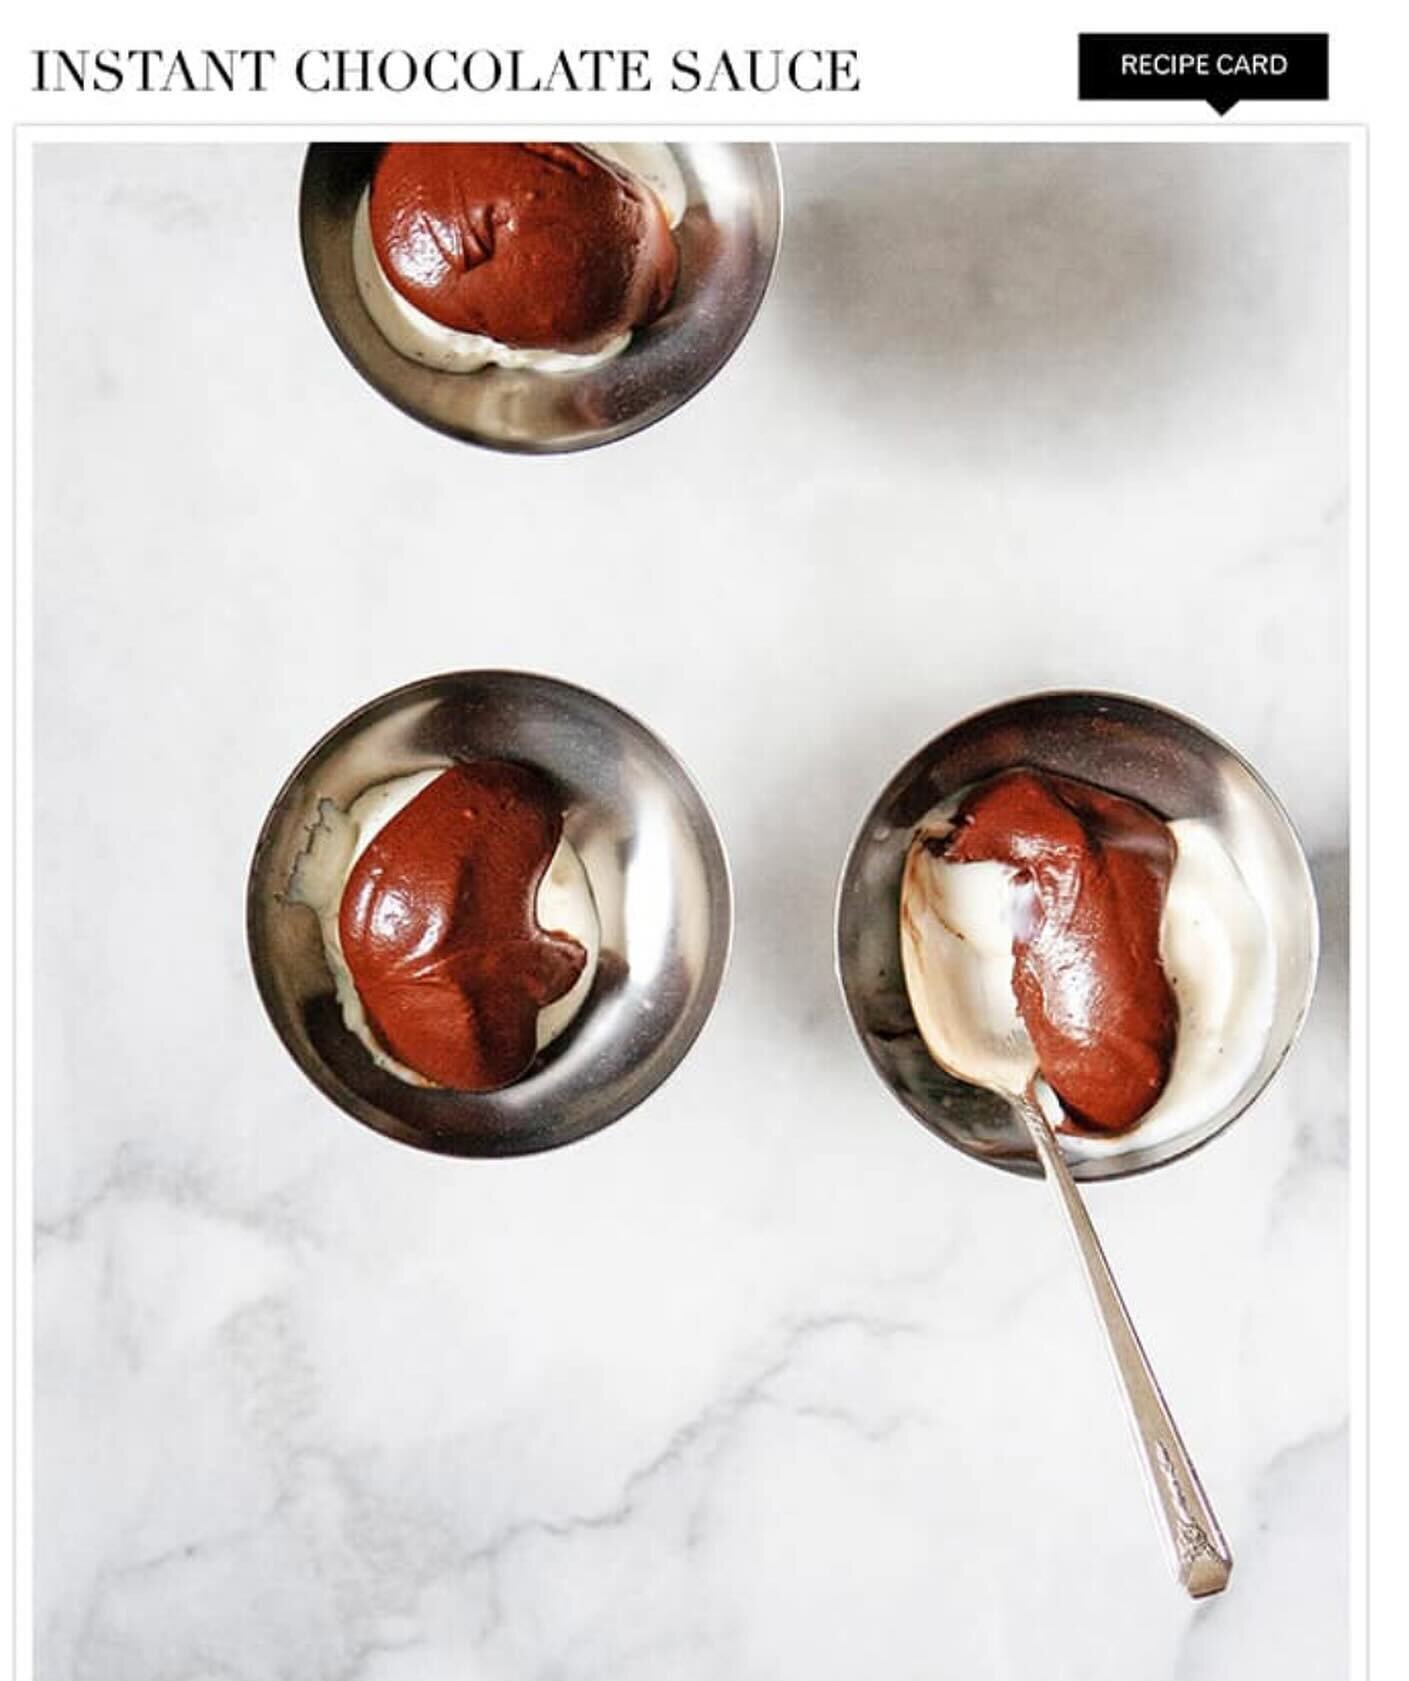 BEAUTIFUL FOOD BY DESIGN | Craving chocolate? My Mom&rsquo;s Instant Chocolate Sauce is the answer - only 3 on-hand ingredients family recipe. From The Beach House Cookbook. Digital or Print available. 

TAP BIO FOR LINK
https://bijouxs.com/shop/the-